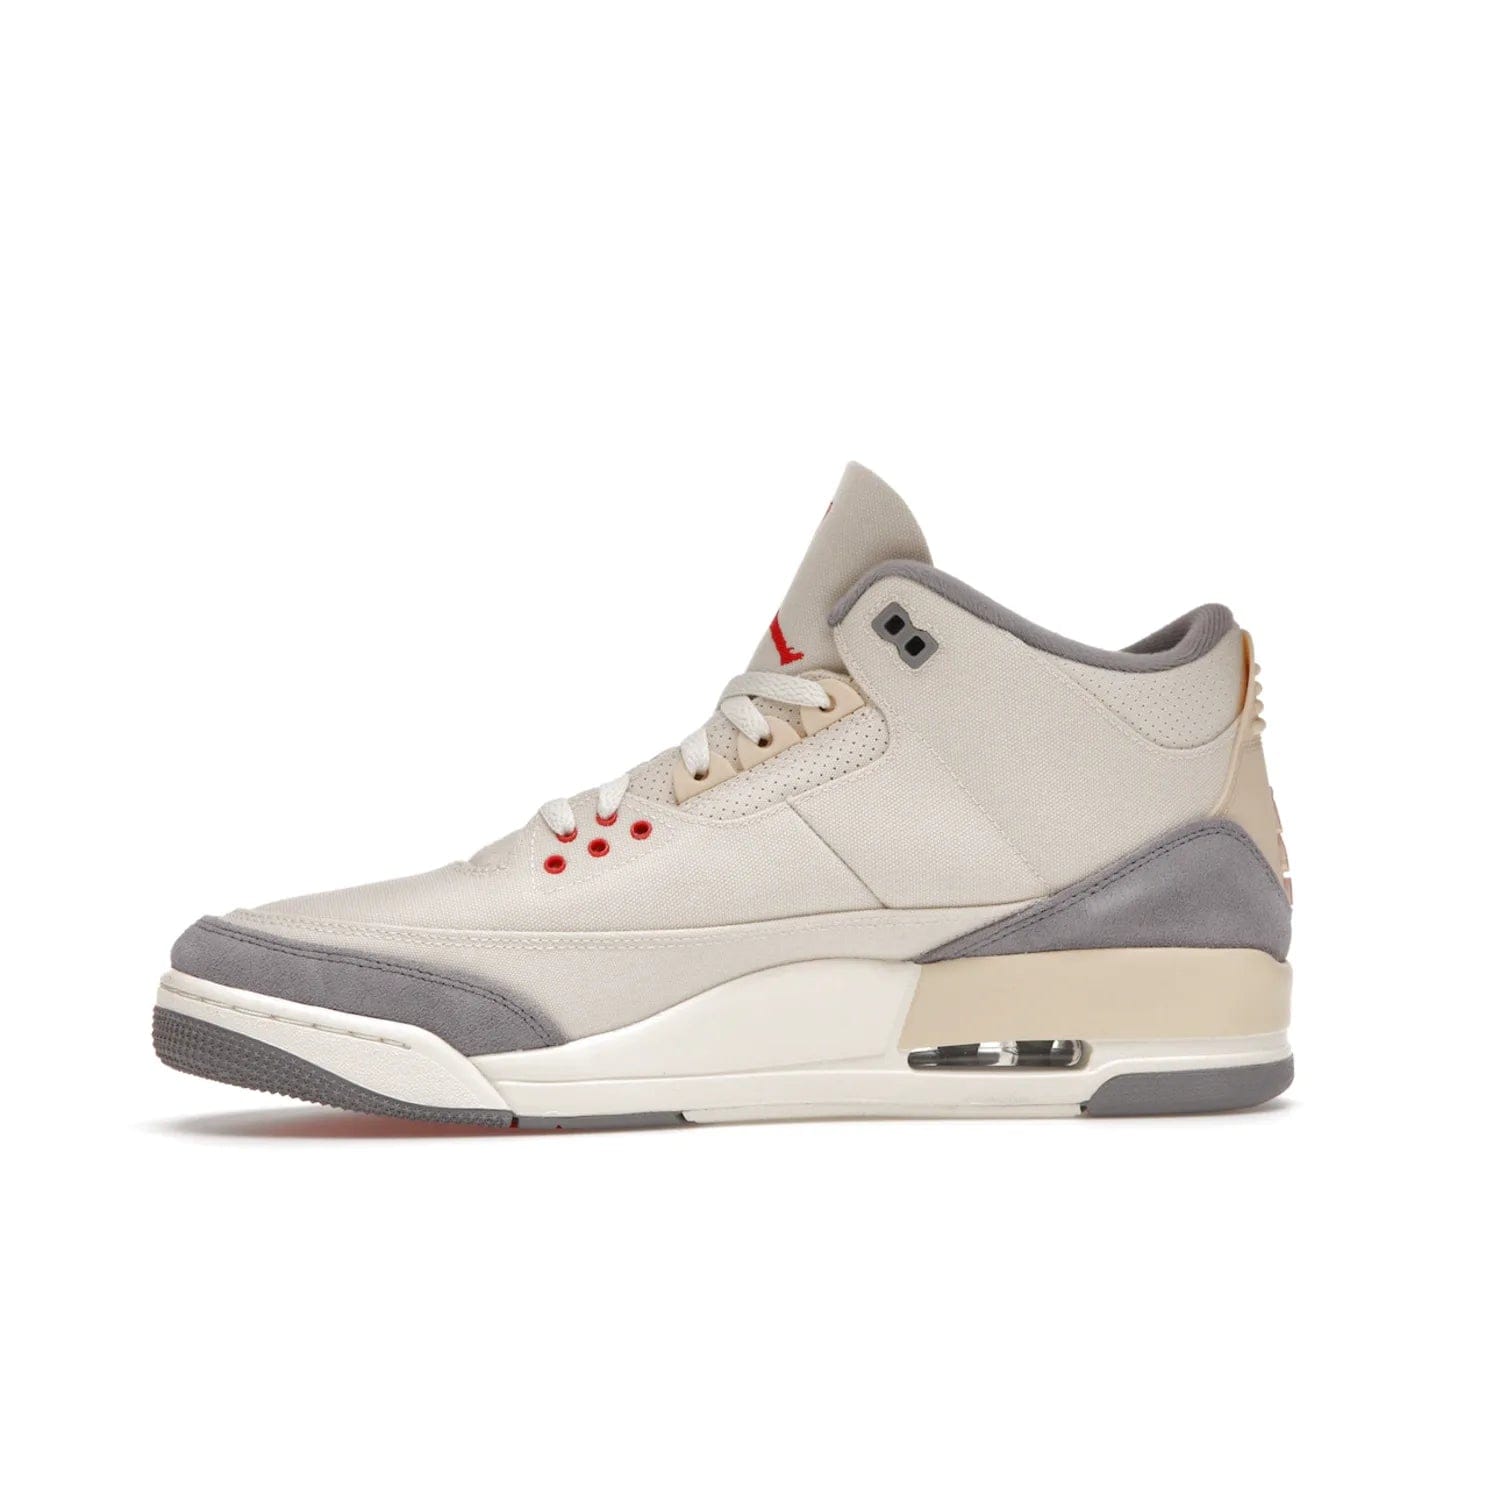 Jordan 3 Retro Muslin - Image 18 - Only at www.BallersClubKickz.com - Eye-catching Air Jordan 3 Retro Muslin in a neutral palette of grey, cream, and red. Featuring canvas upper, suede overlays and white/grey Air Max sole. Available in March 2022.